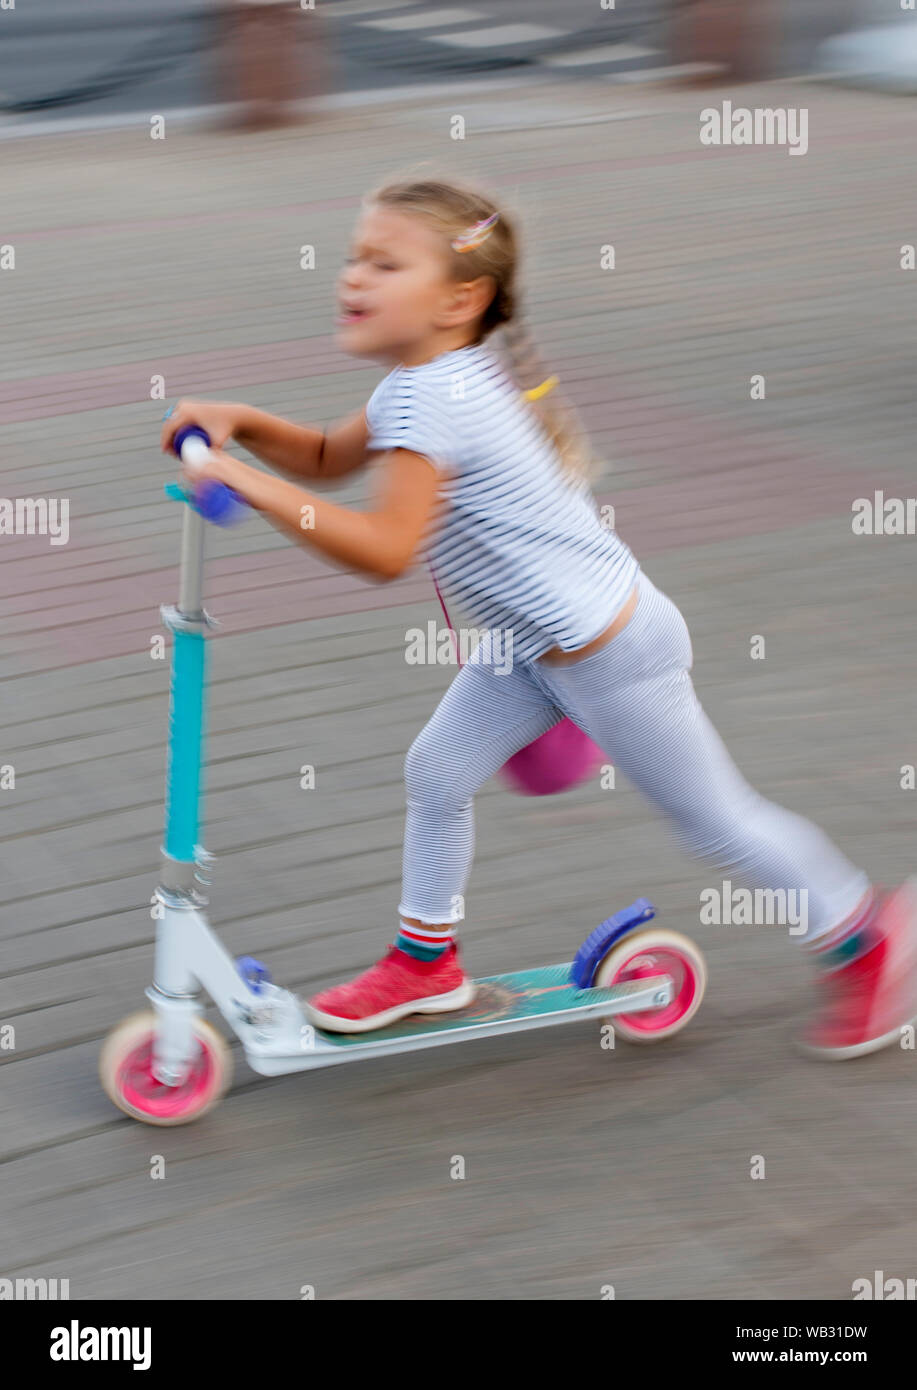 Young girl on a scooter in Minsk, Belarus. Stock Photo